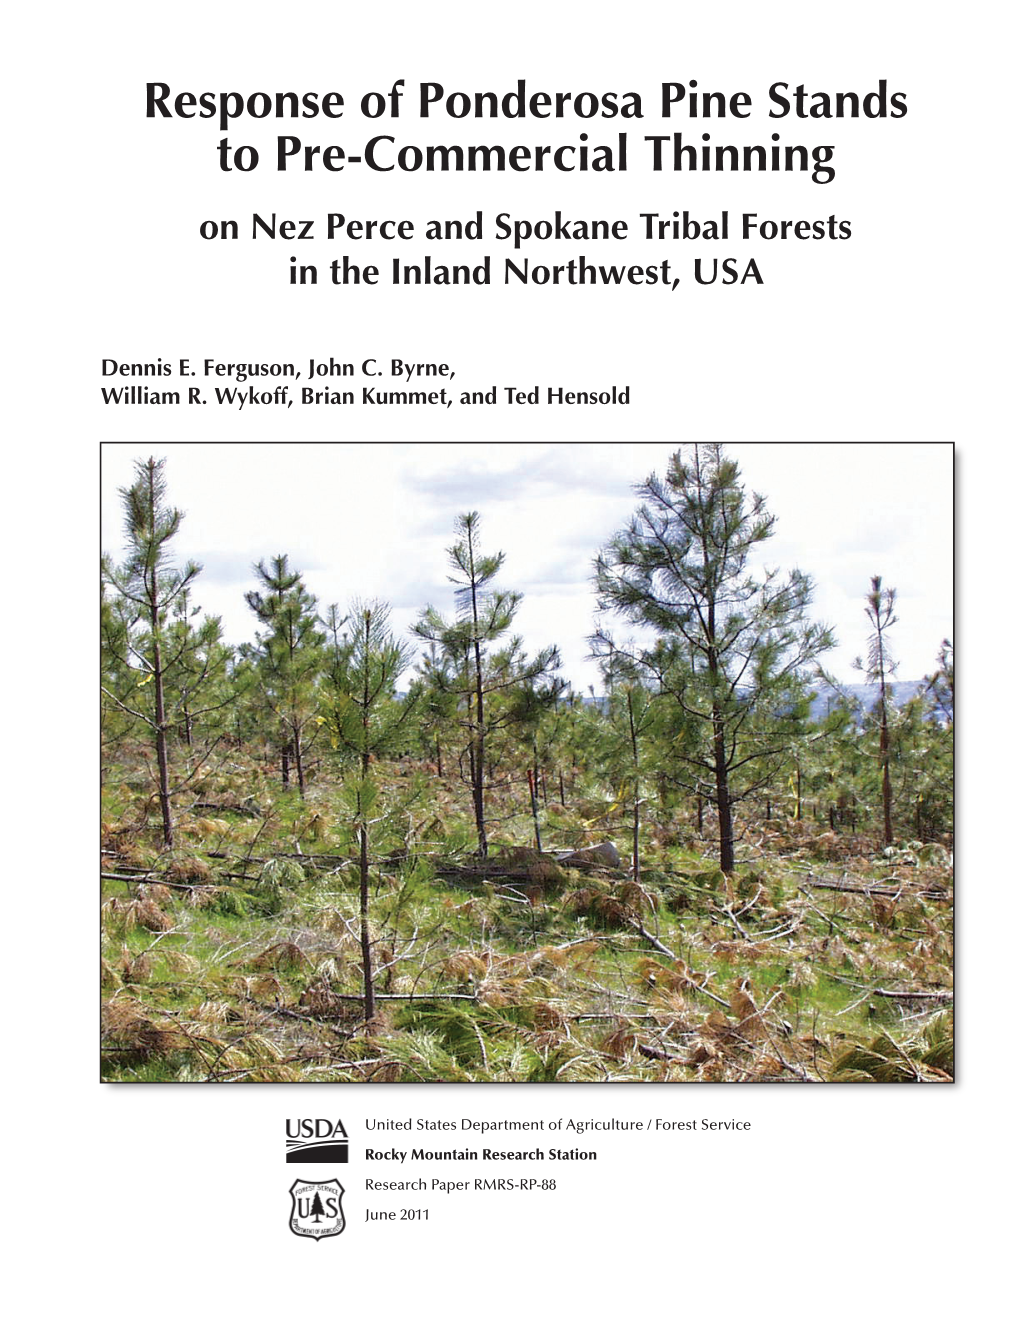 Response of Ponderosa Pine Stands to Pre-Commercial Thinning on Nez Perce and Spokane Tribal Forests in the Inland Northwest, USA